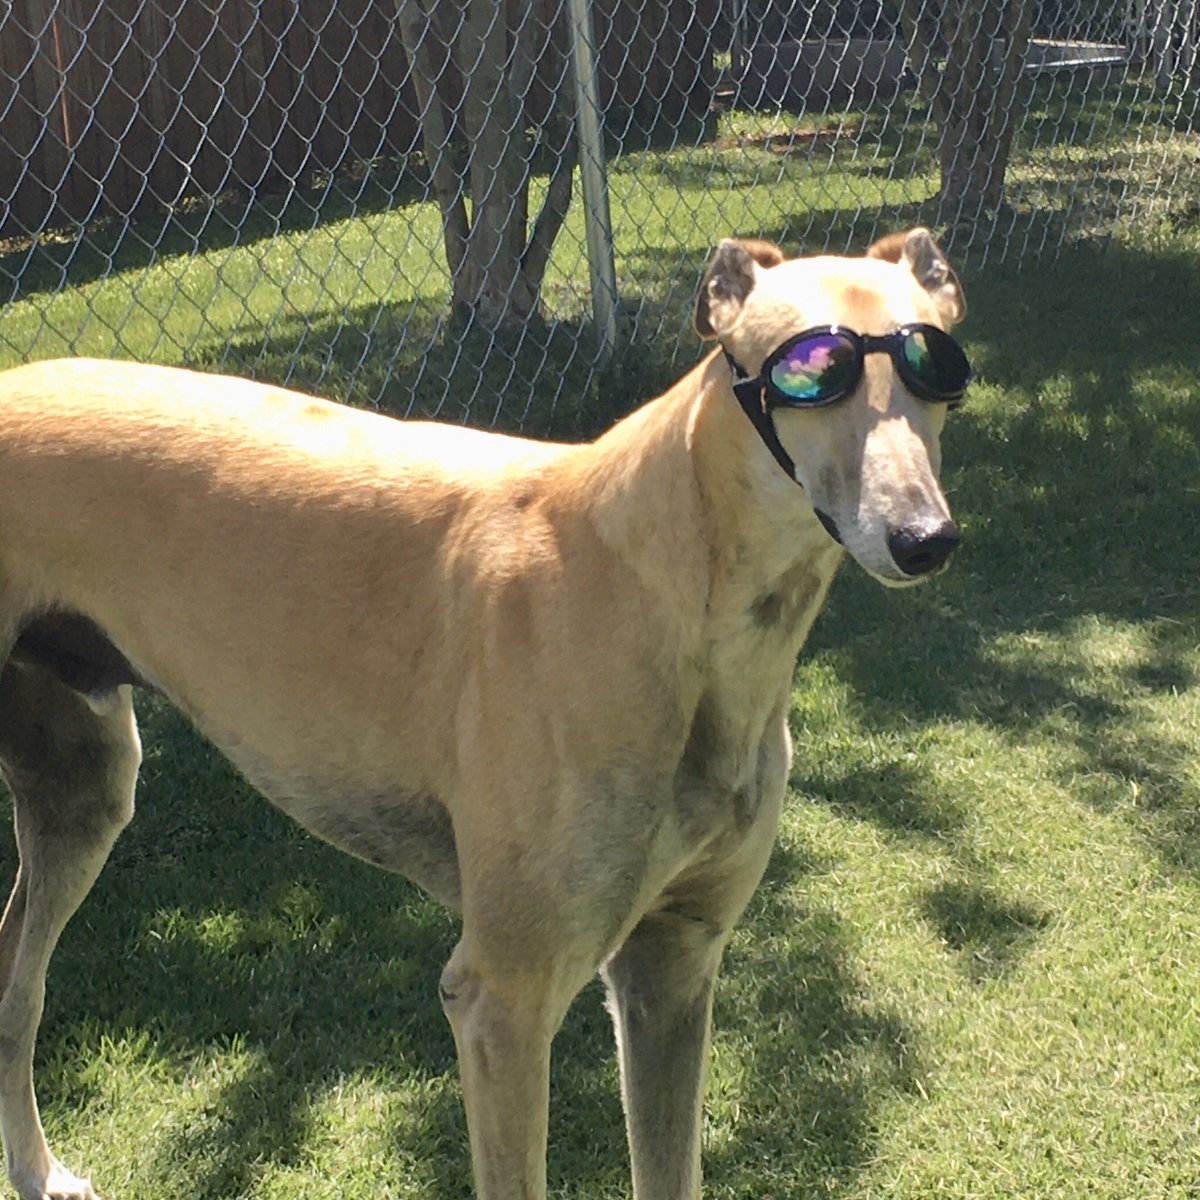 😎Argo lookin’ super cool in his new sunglasses 🕶

#greyhound #doggoggles #goggles #dogsunglasses #greyhoundsoftwitter #dogsoftwitter #cooldog #dogsinsunglasses #cutedog #dogfeatures #greyhoundlife #greyhoundcuteness #greyhoundlovers #longboi #sighthound #lurcher #retiredracer